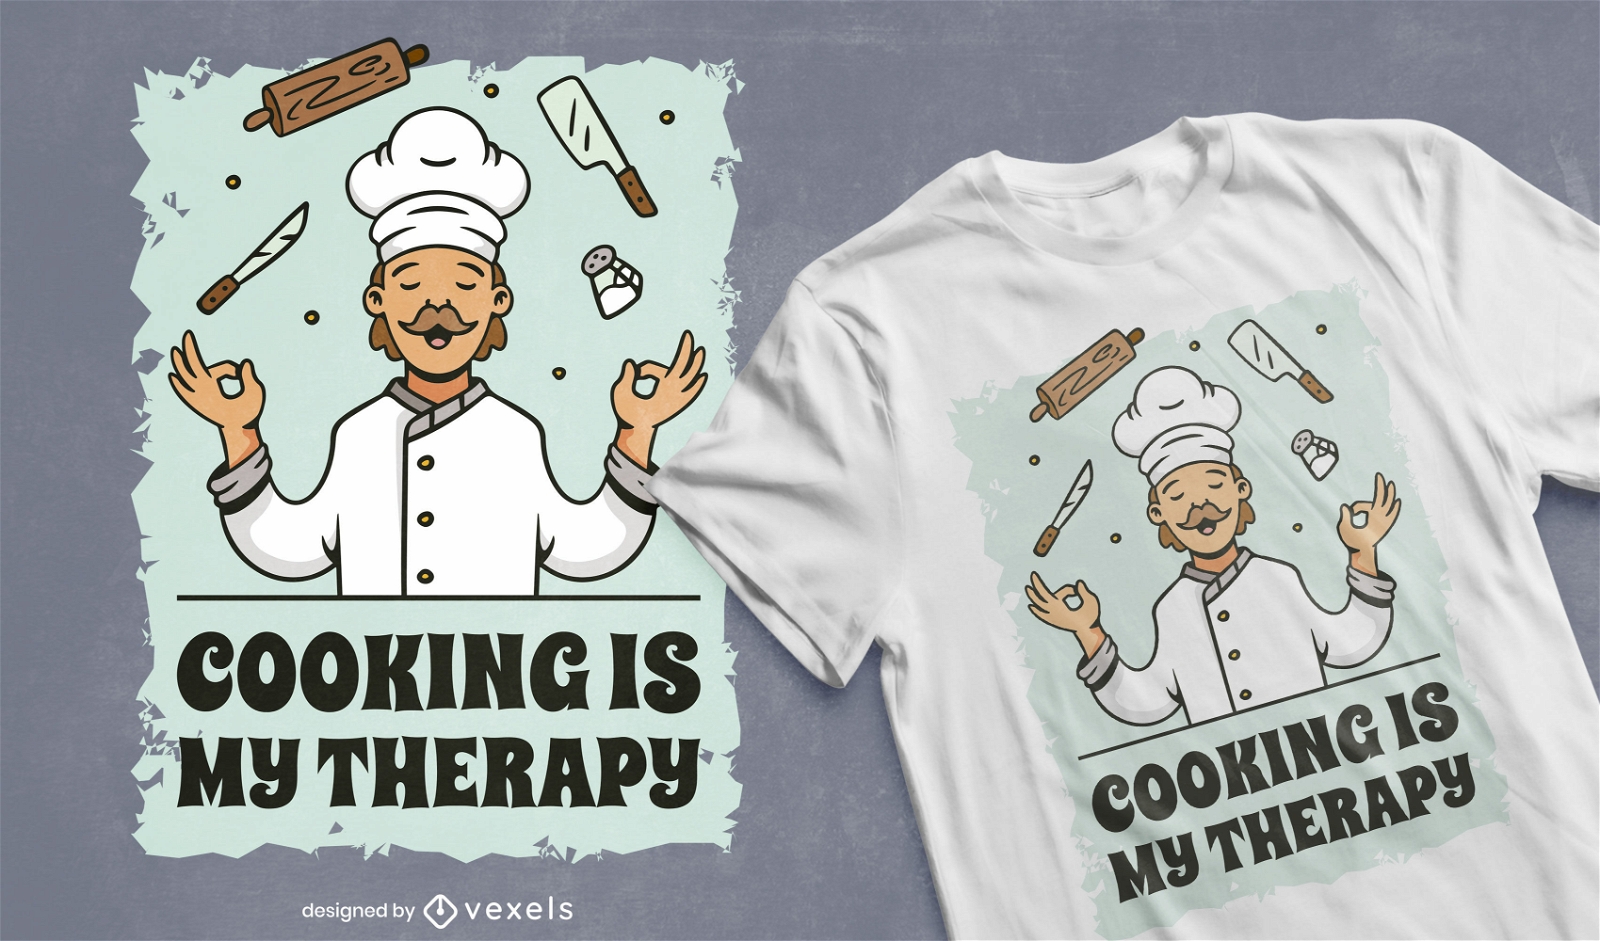 Cooking therapy t-shirt design